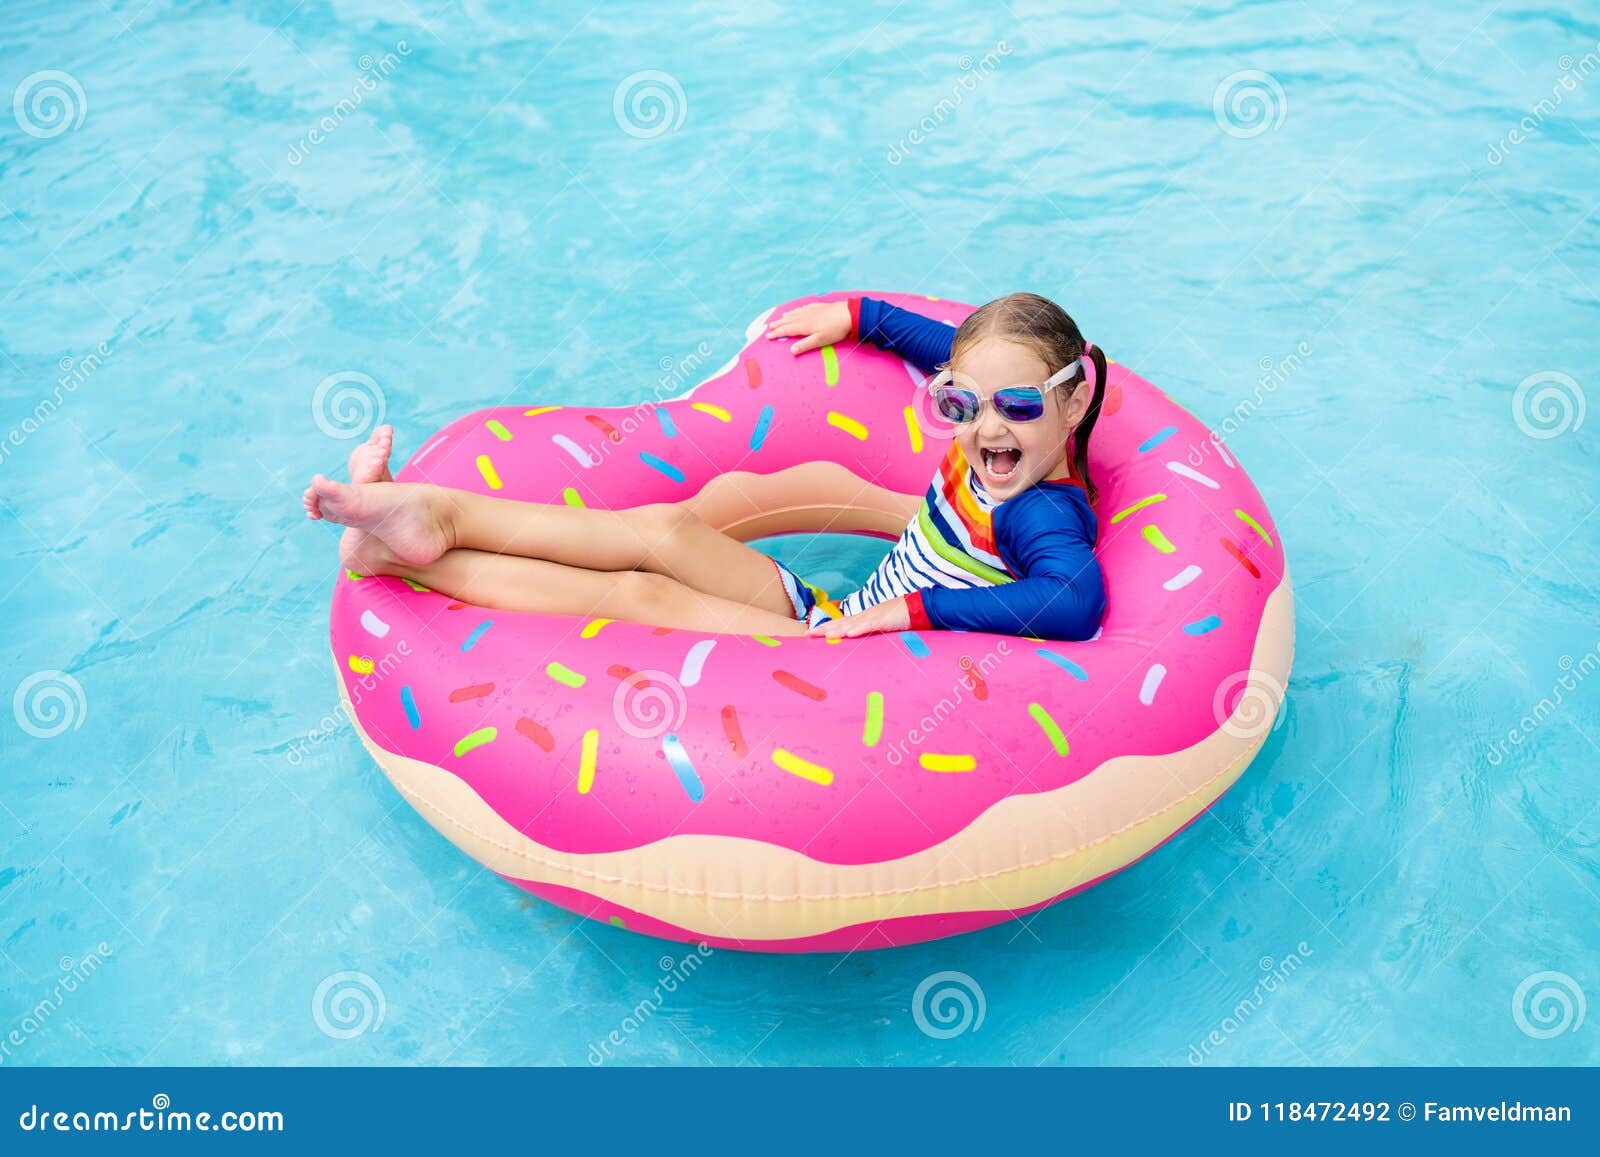 child in swimming pool on donut float